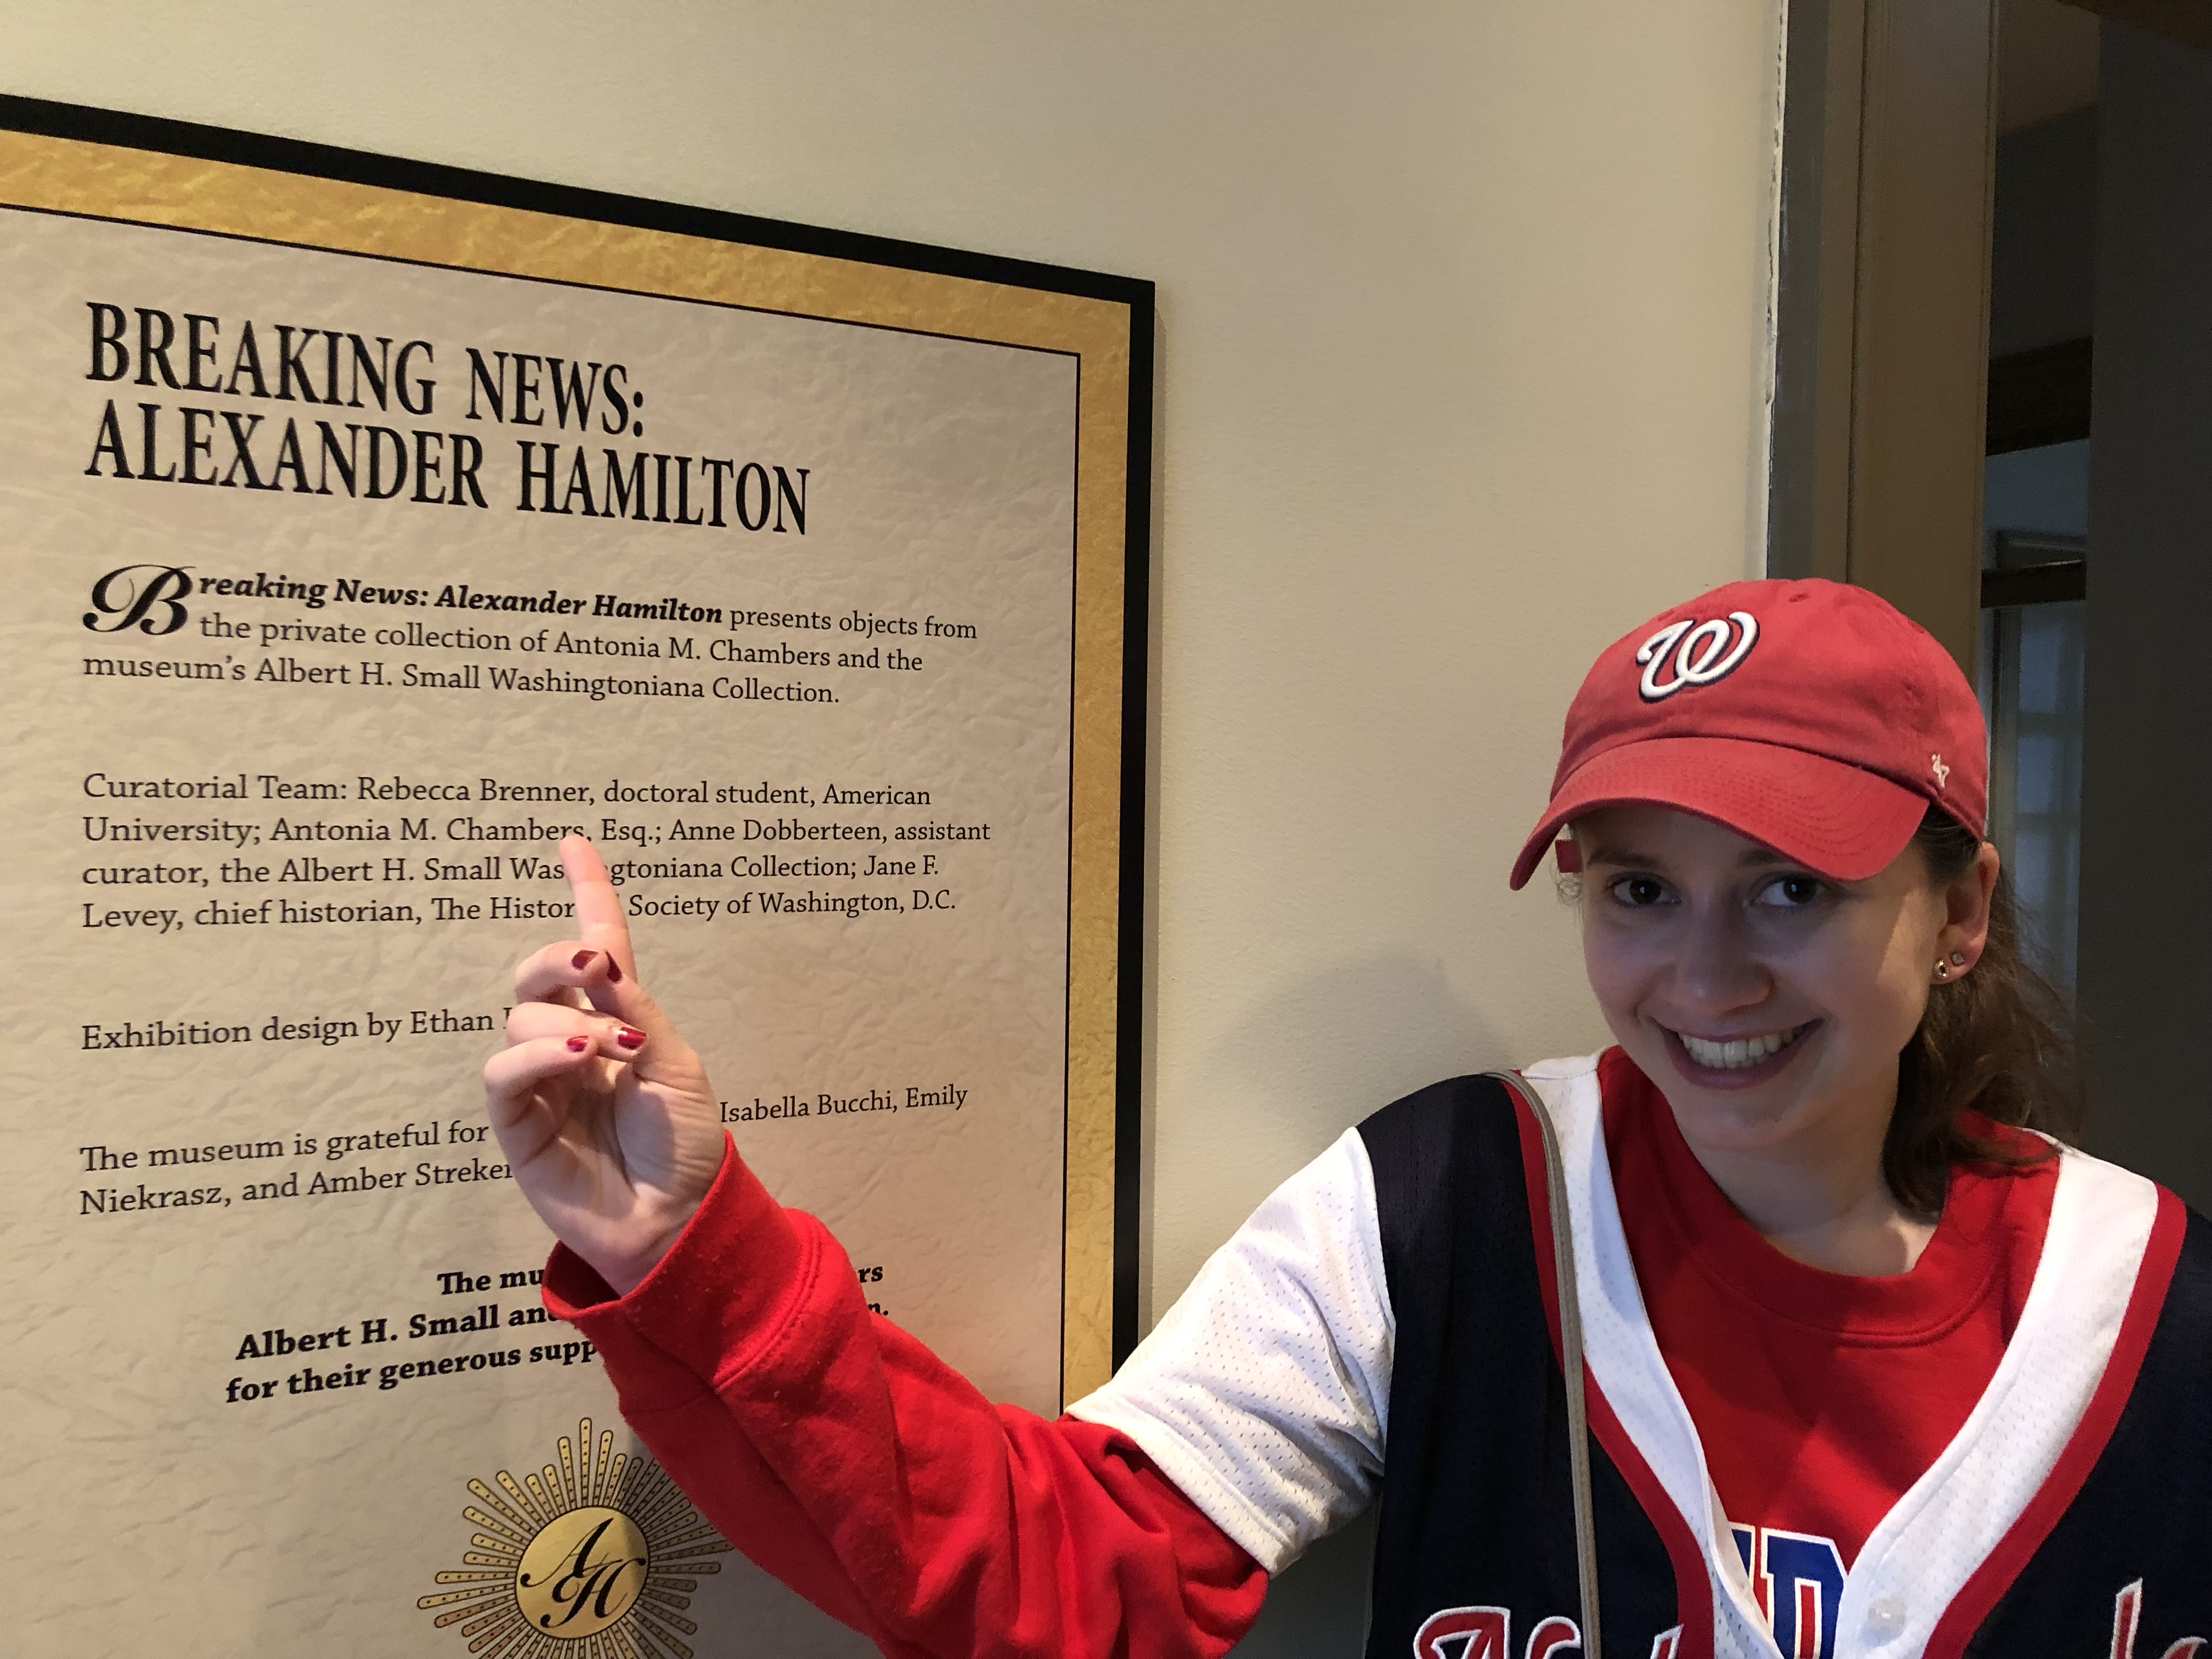 Rebecca Brenner Graham in a red sweatshirt with a white, red, and black jersey on top, and a red ball cap with a white W, the logo for the Washington Nationals.  Brenner is pointing to a poster for “Breaking News: Alexander Hamilton” for the George Washington University Museum. Her finger is pointing to “Curatorial Team: Rebecca Brenner, doctorial student, American University.”